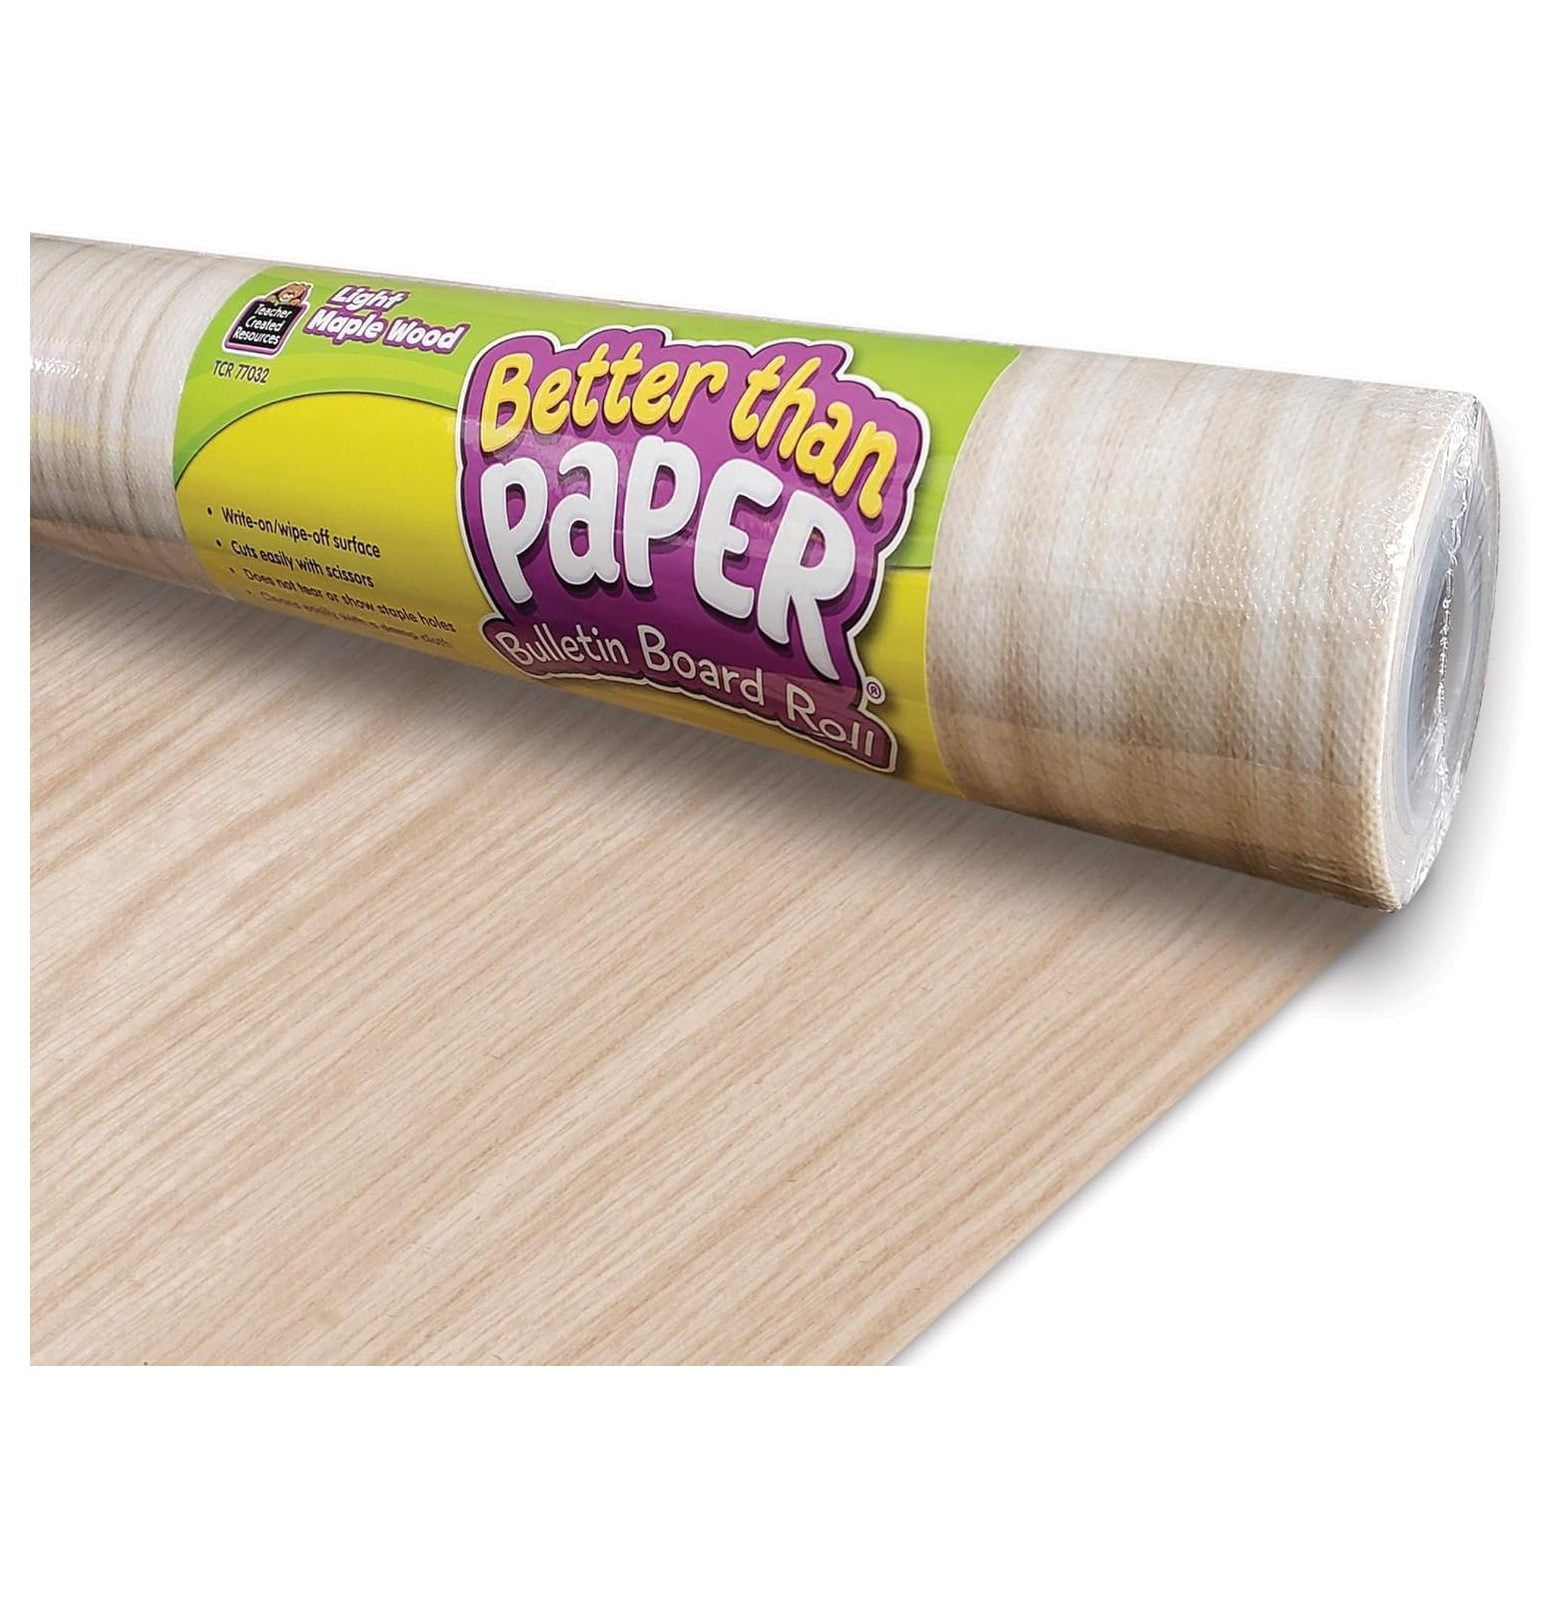 Teacher Created Resources Fun Size Better Than Paper Bulletin Board Roll Black Painted Dots on White